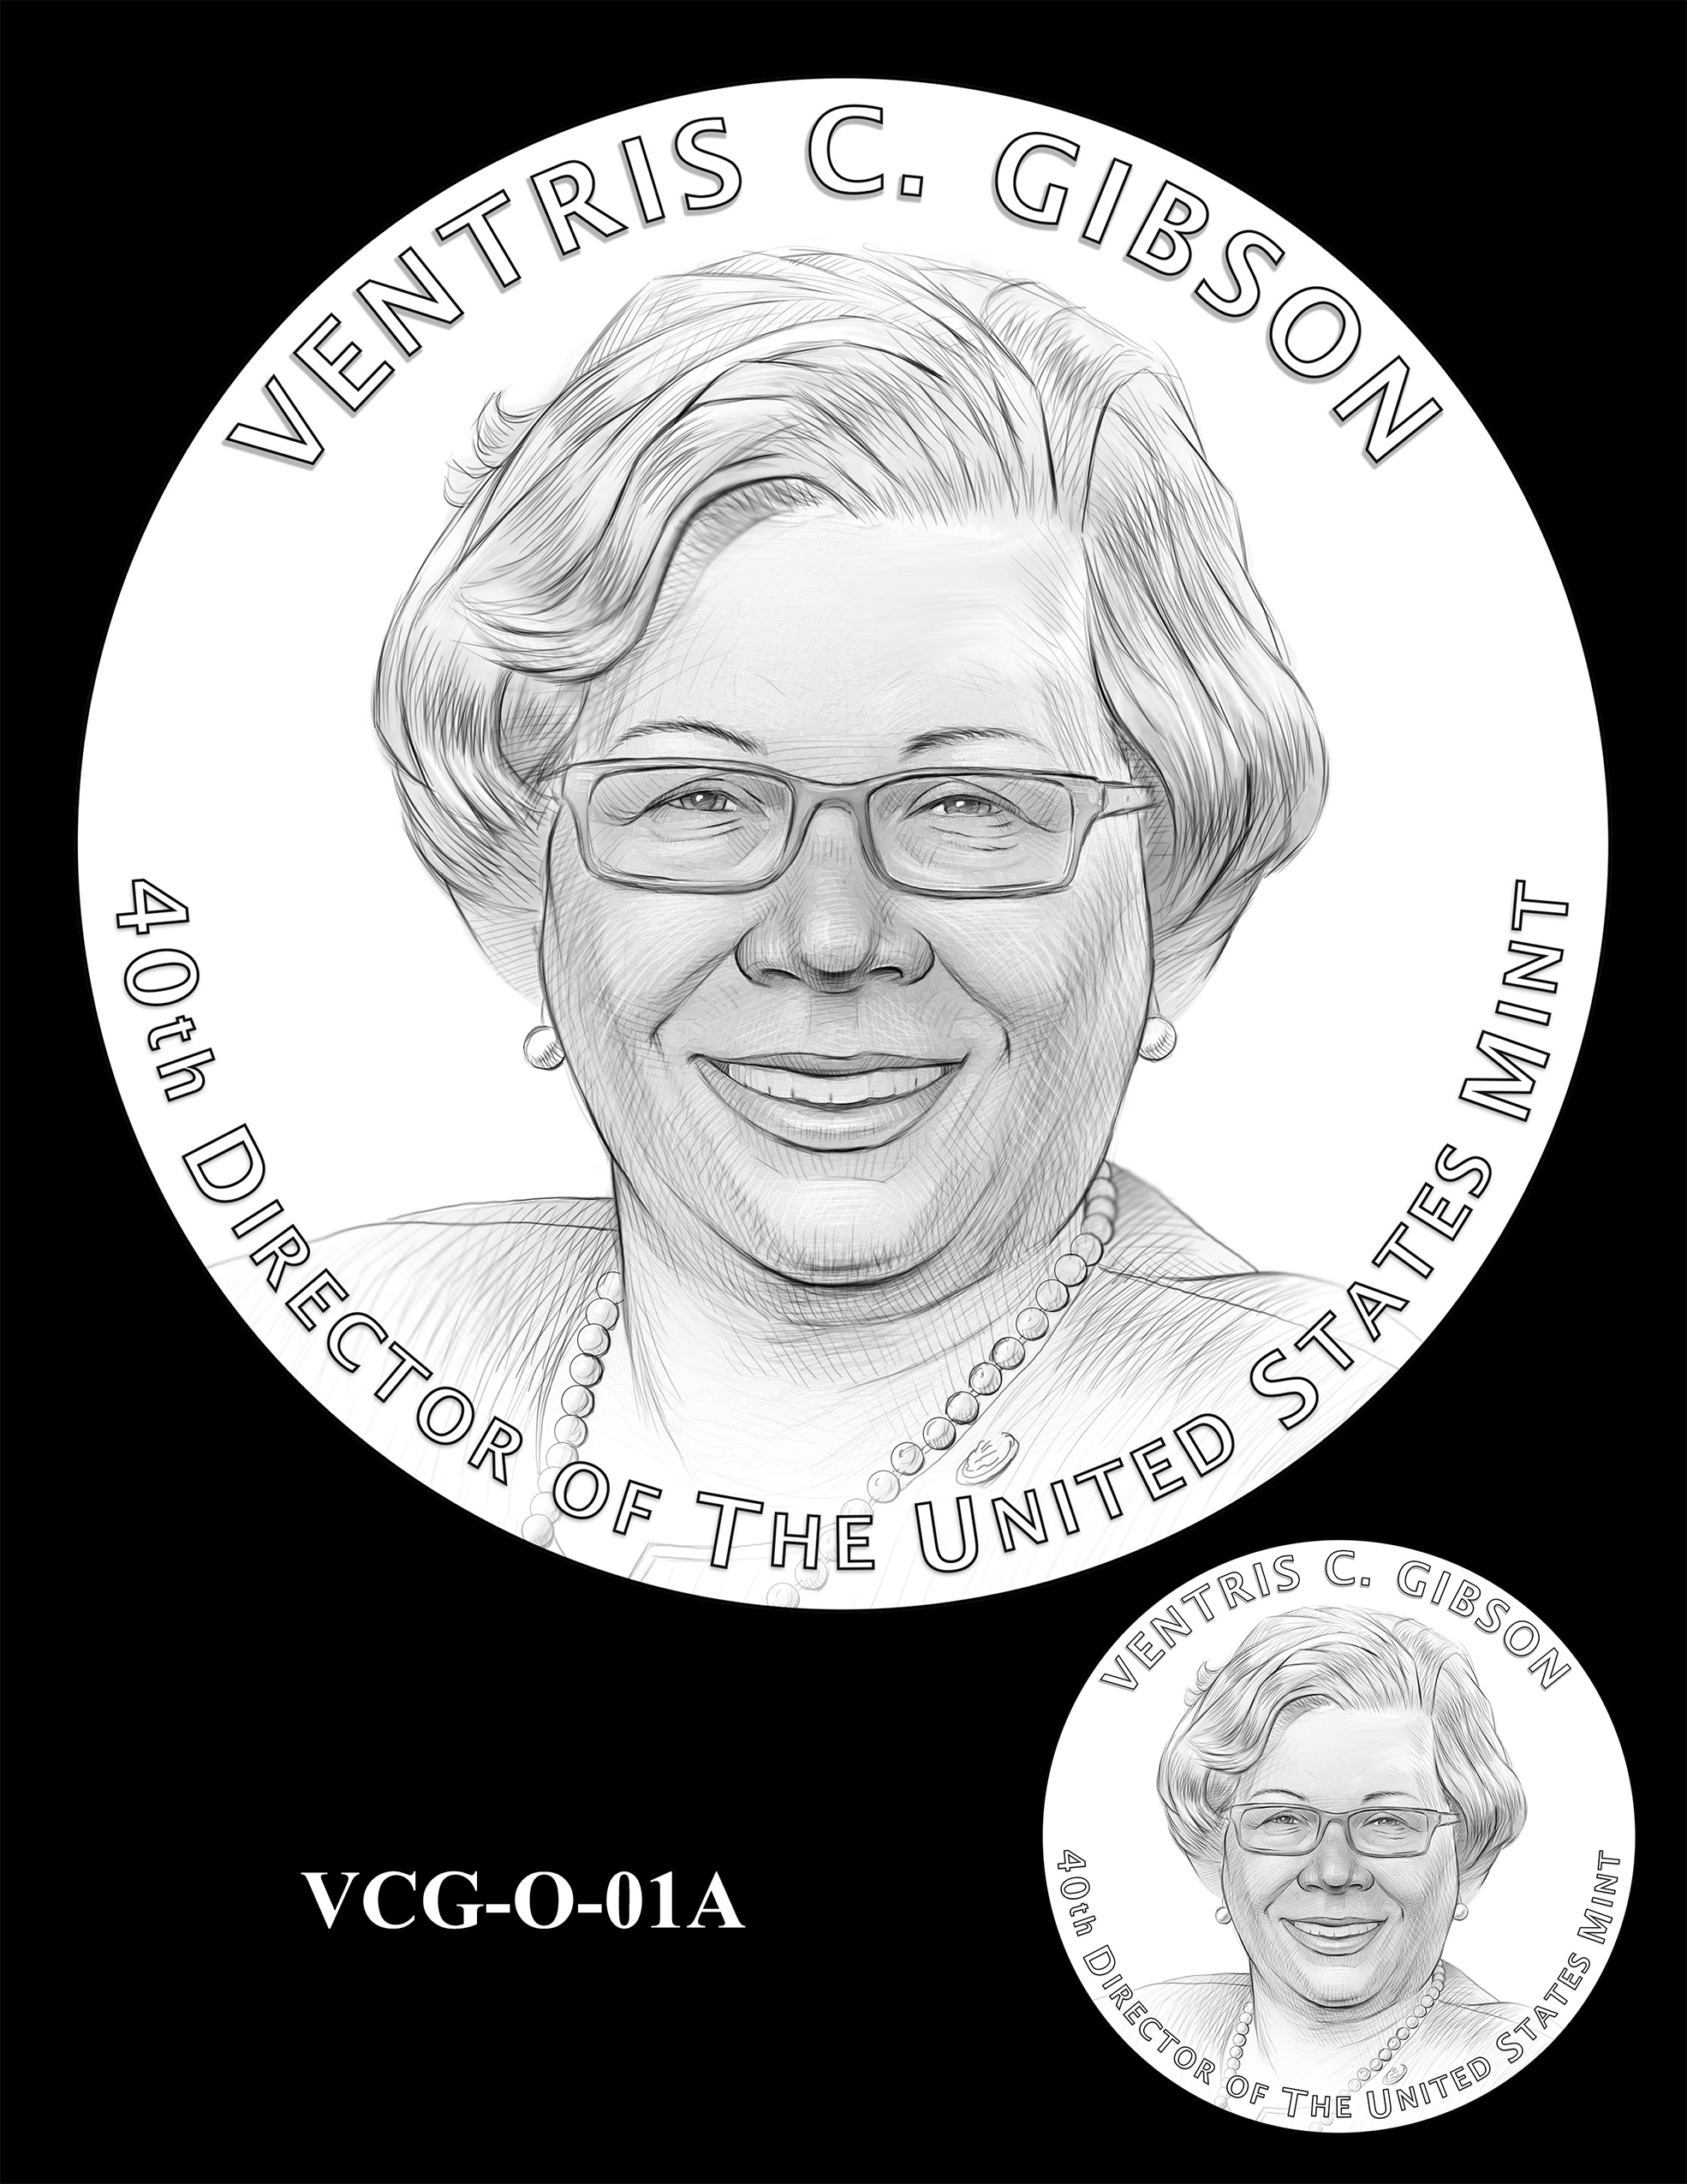 VCG-O-01A -- Ventris C. Gibson Director of the Mint Medal